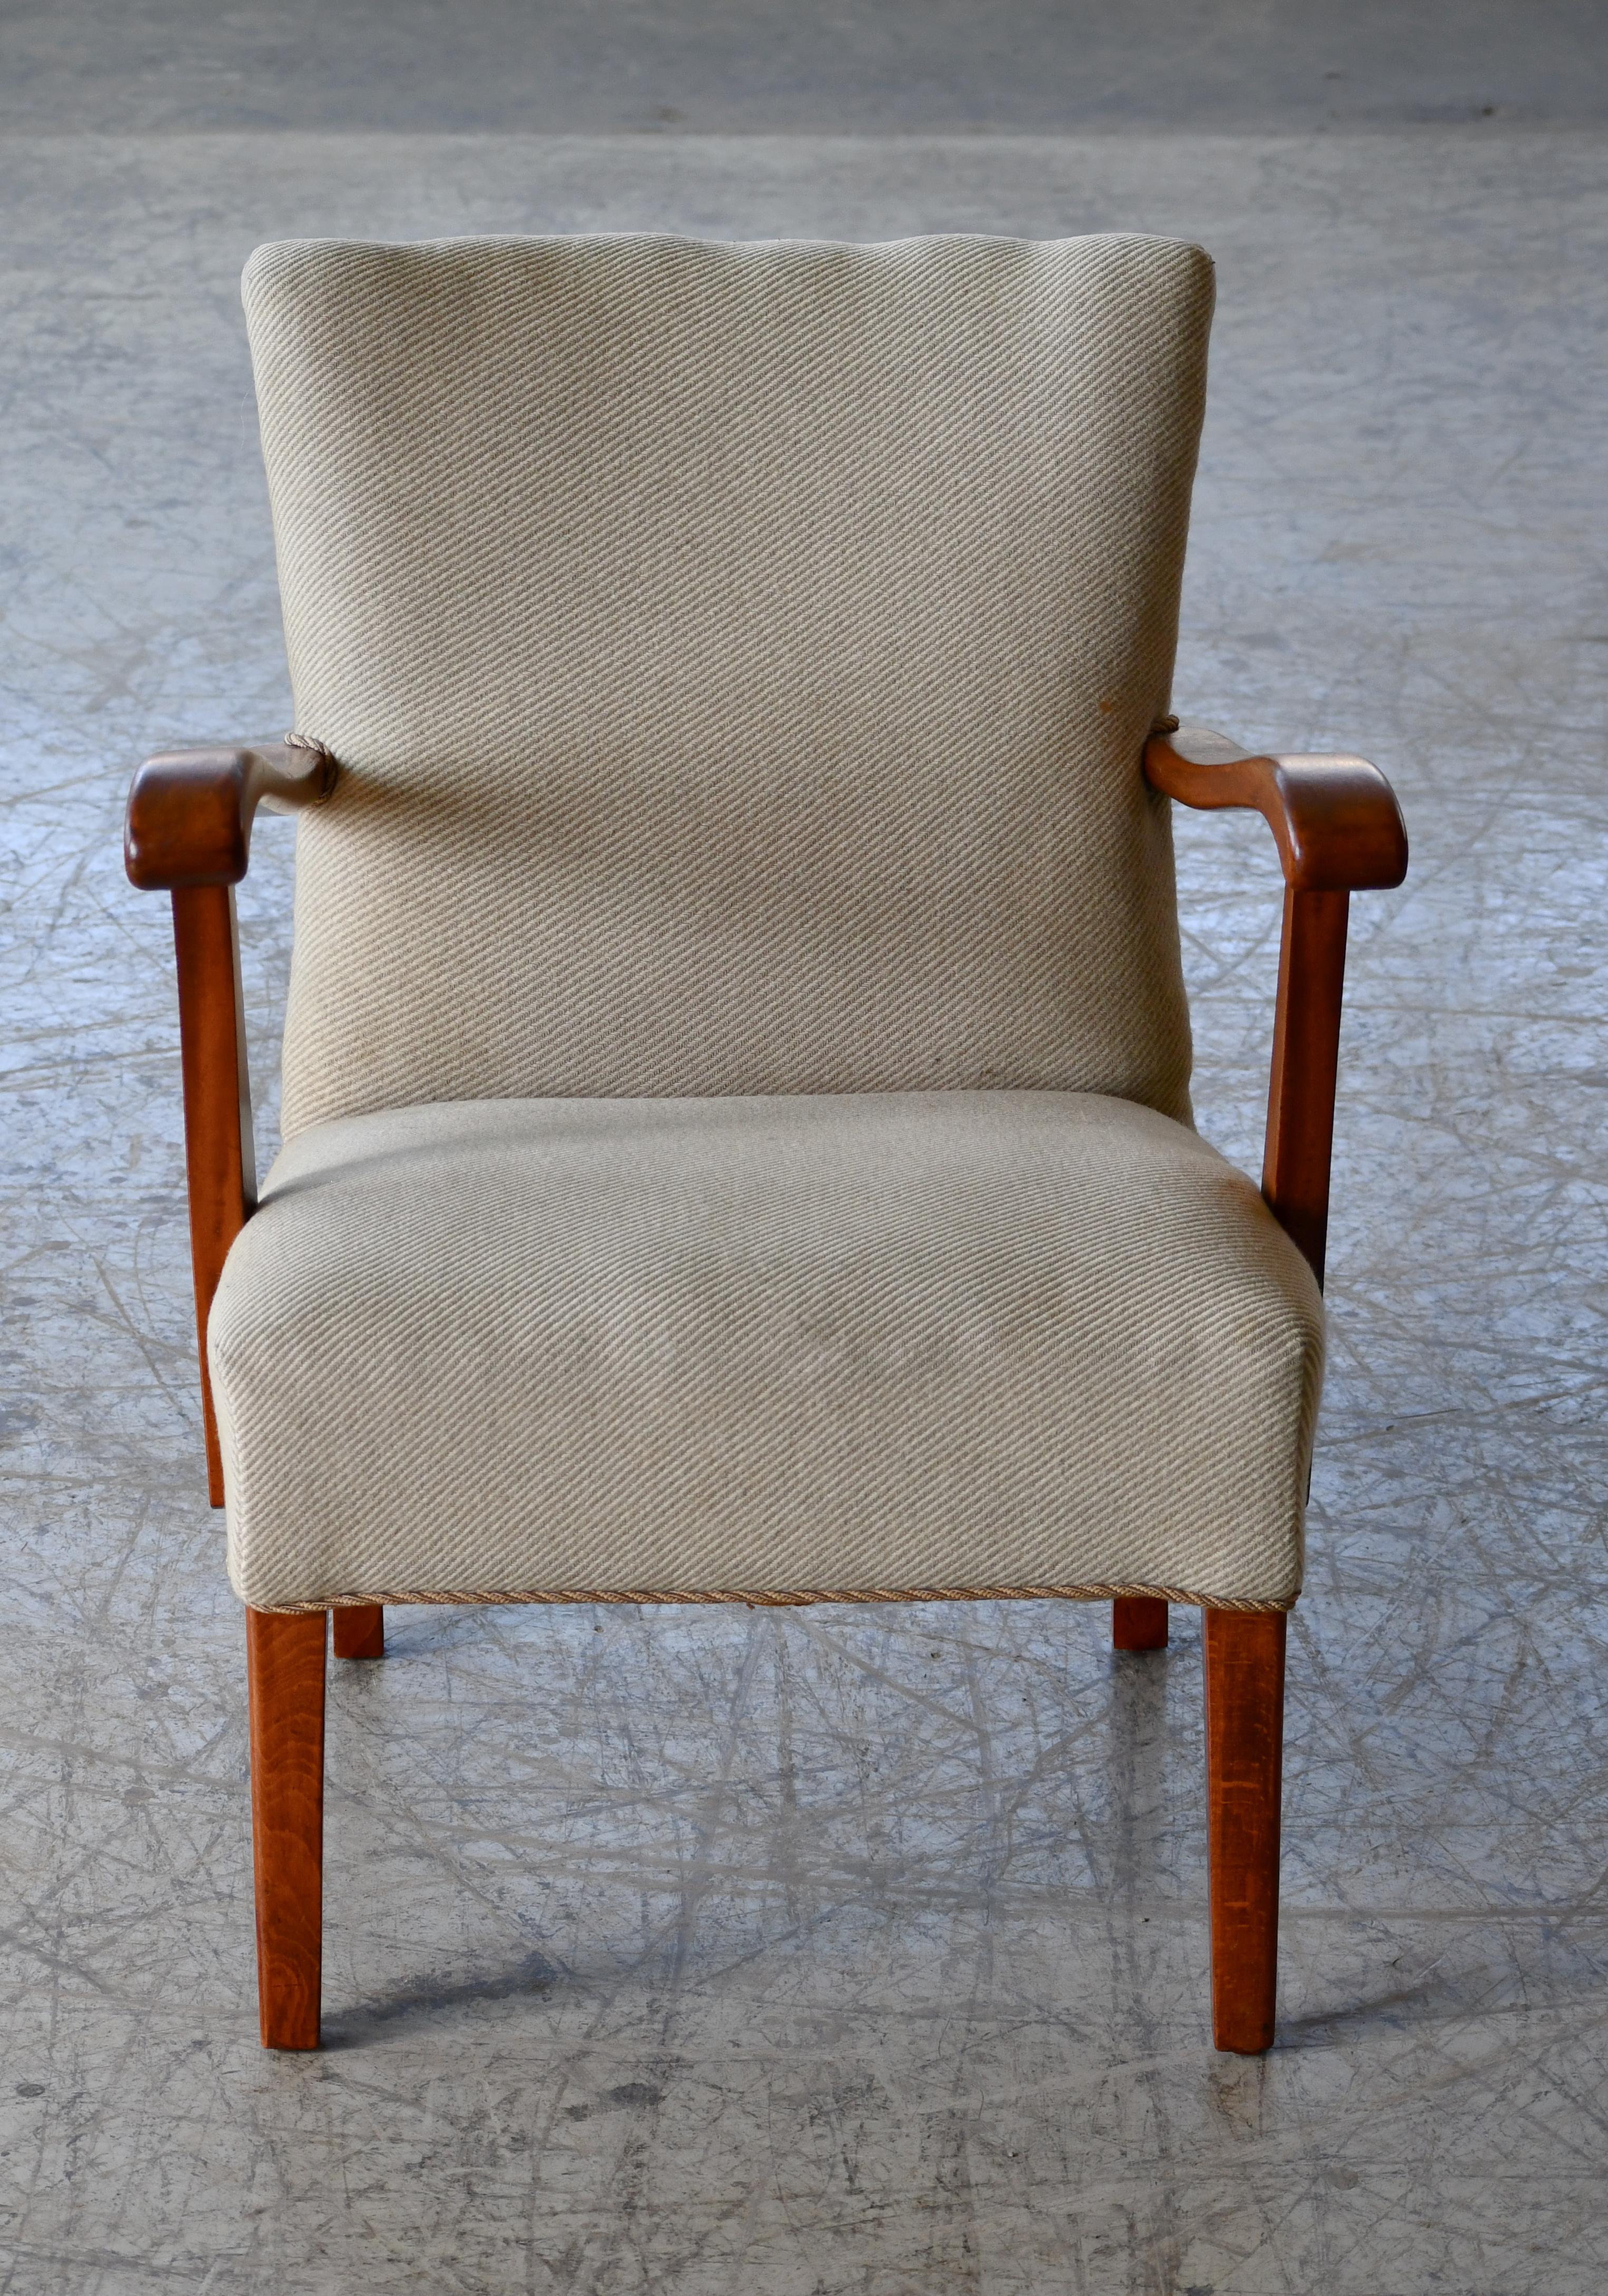 Very cool and elegant Danish easy chair most likely made late 1940's. Unknown Designer/Maker but classic Danish modern design. Armrests and frame made from solid beech. Coild spings in the seat. Not large but with strong presence making the chair